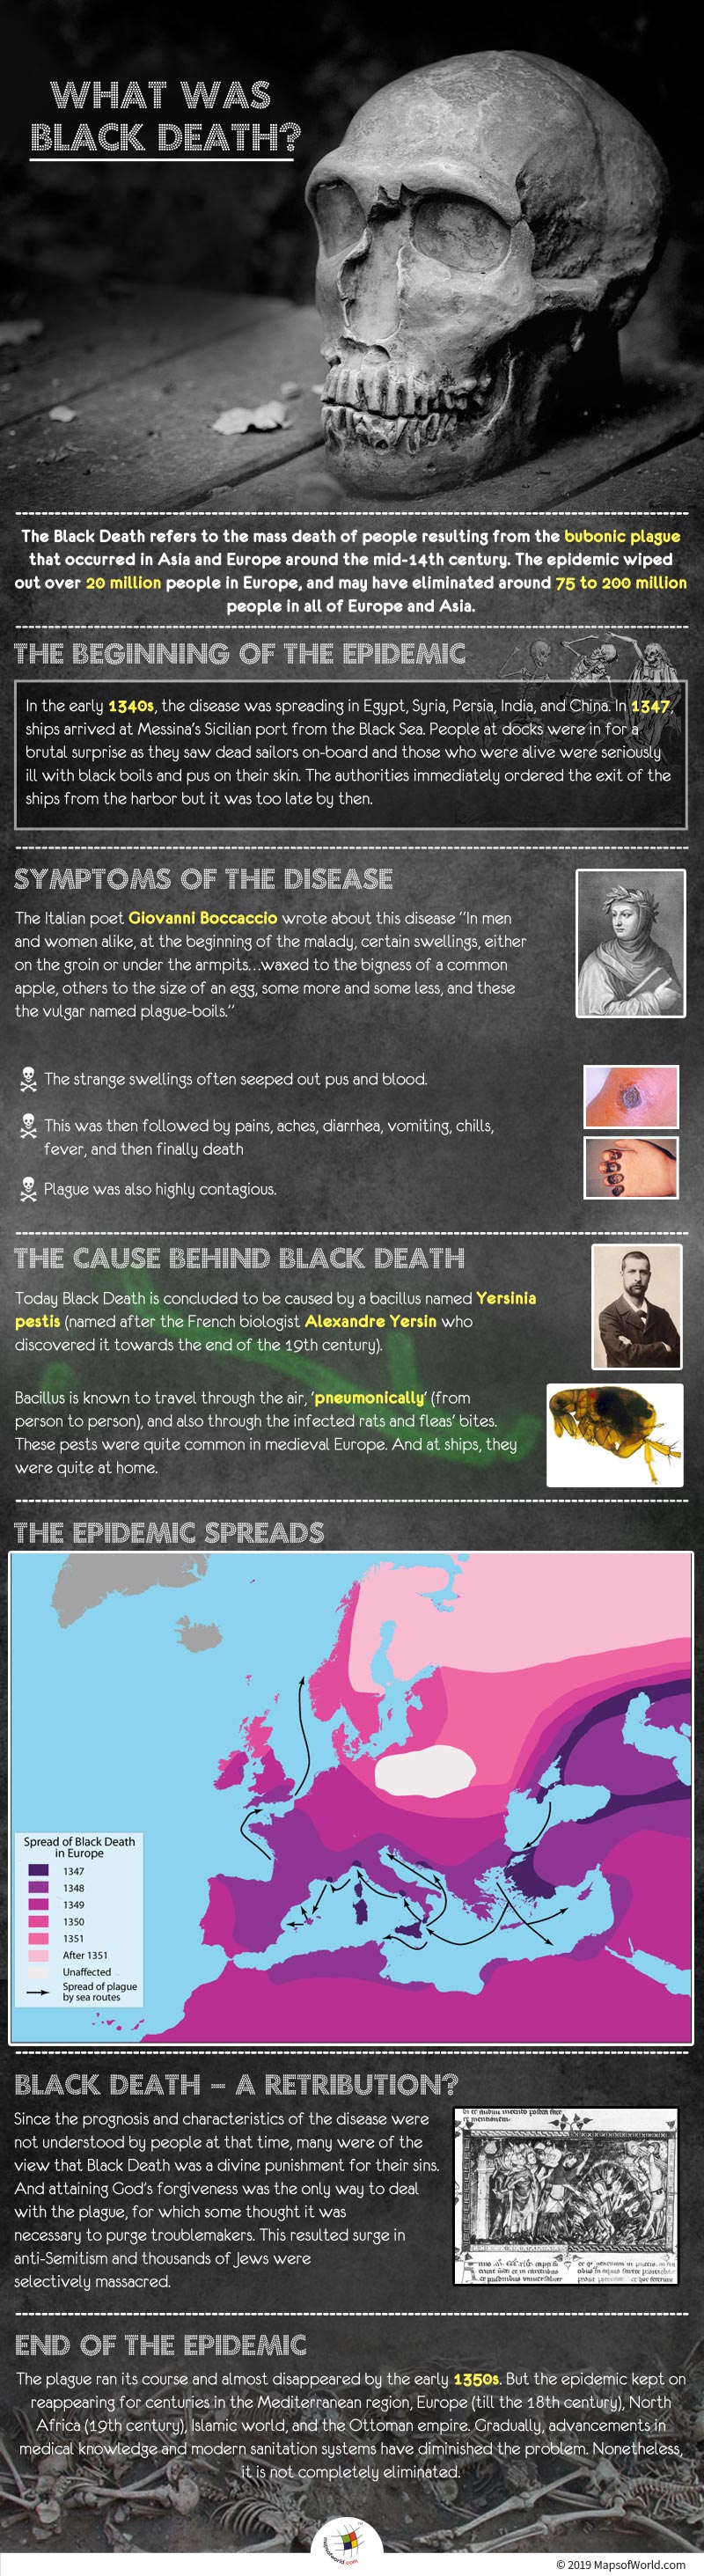 Infographic Giving Details on Black Death